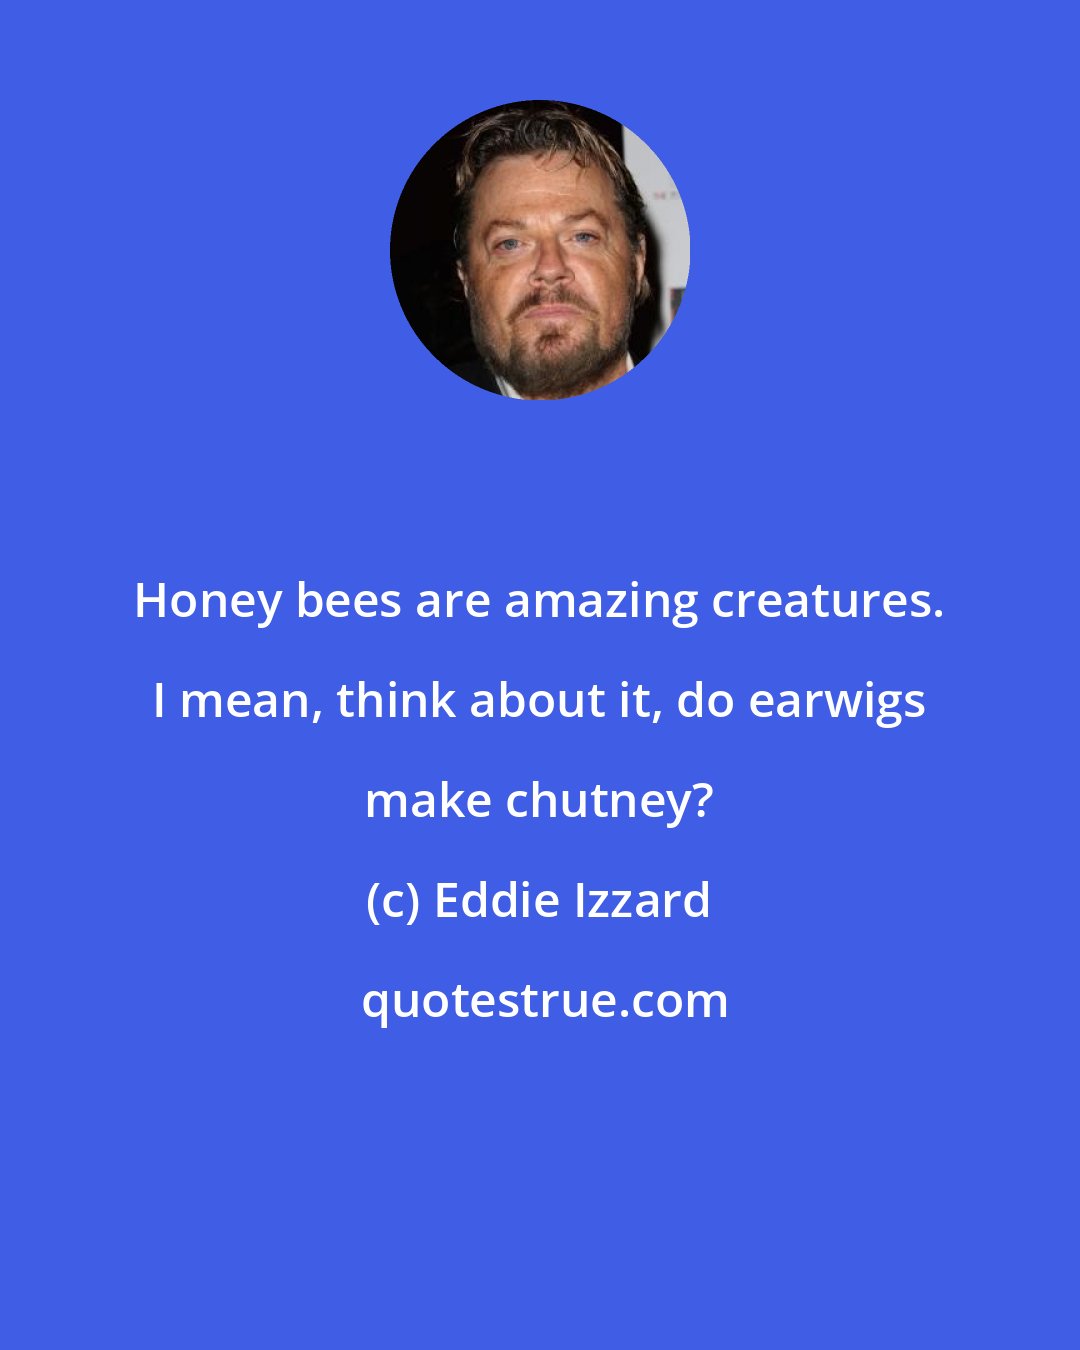 Eddie Izzard: Honey bees are amazing creatures. I mean, think about it, do earwigs make chutney?